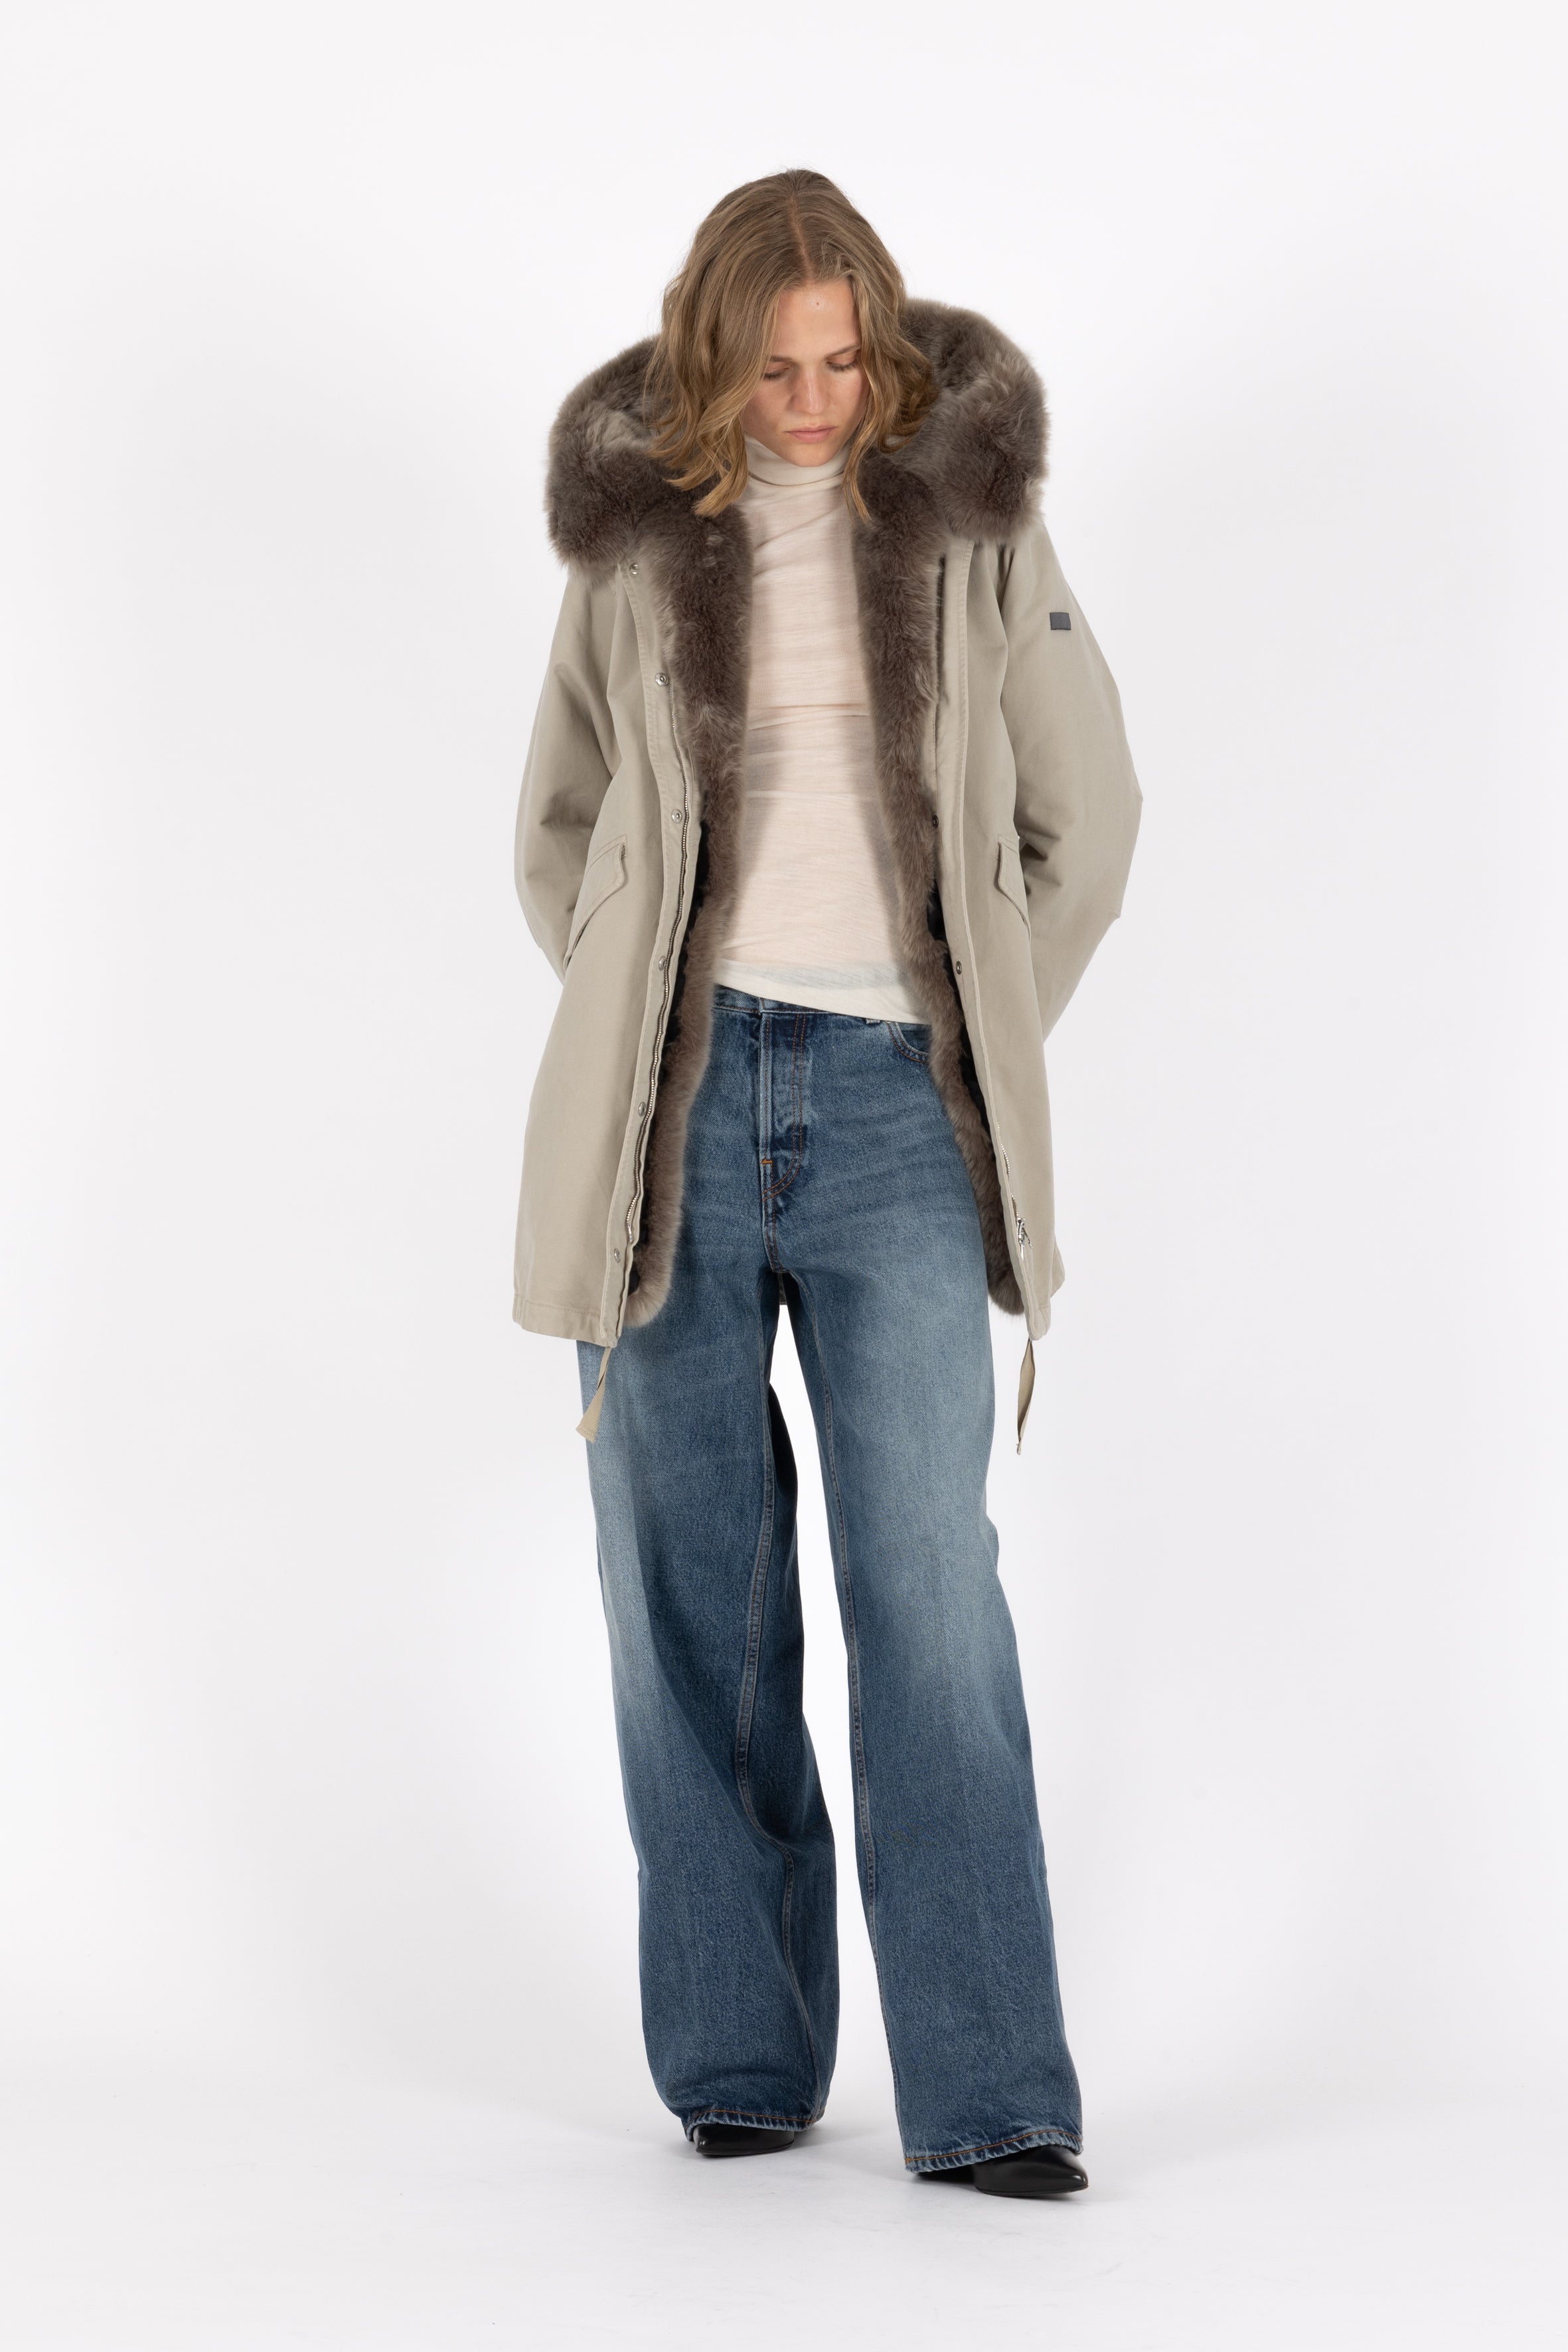 short flared cotton parka with flap pockets